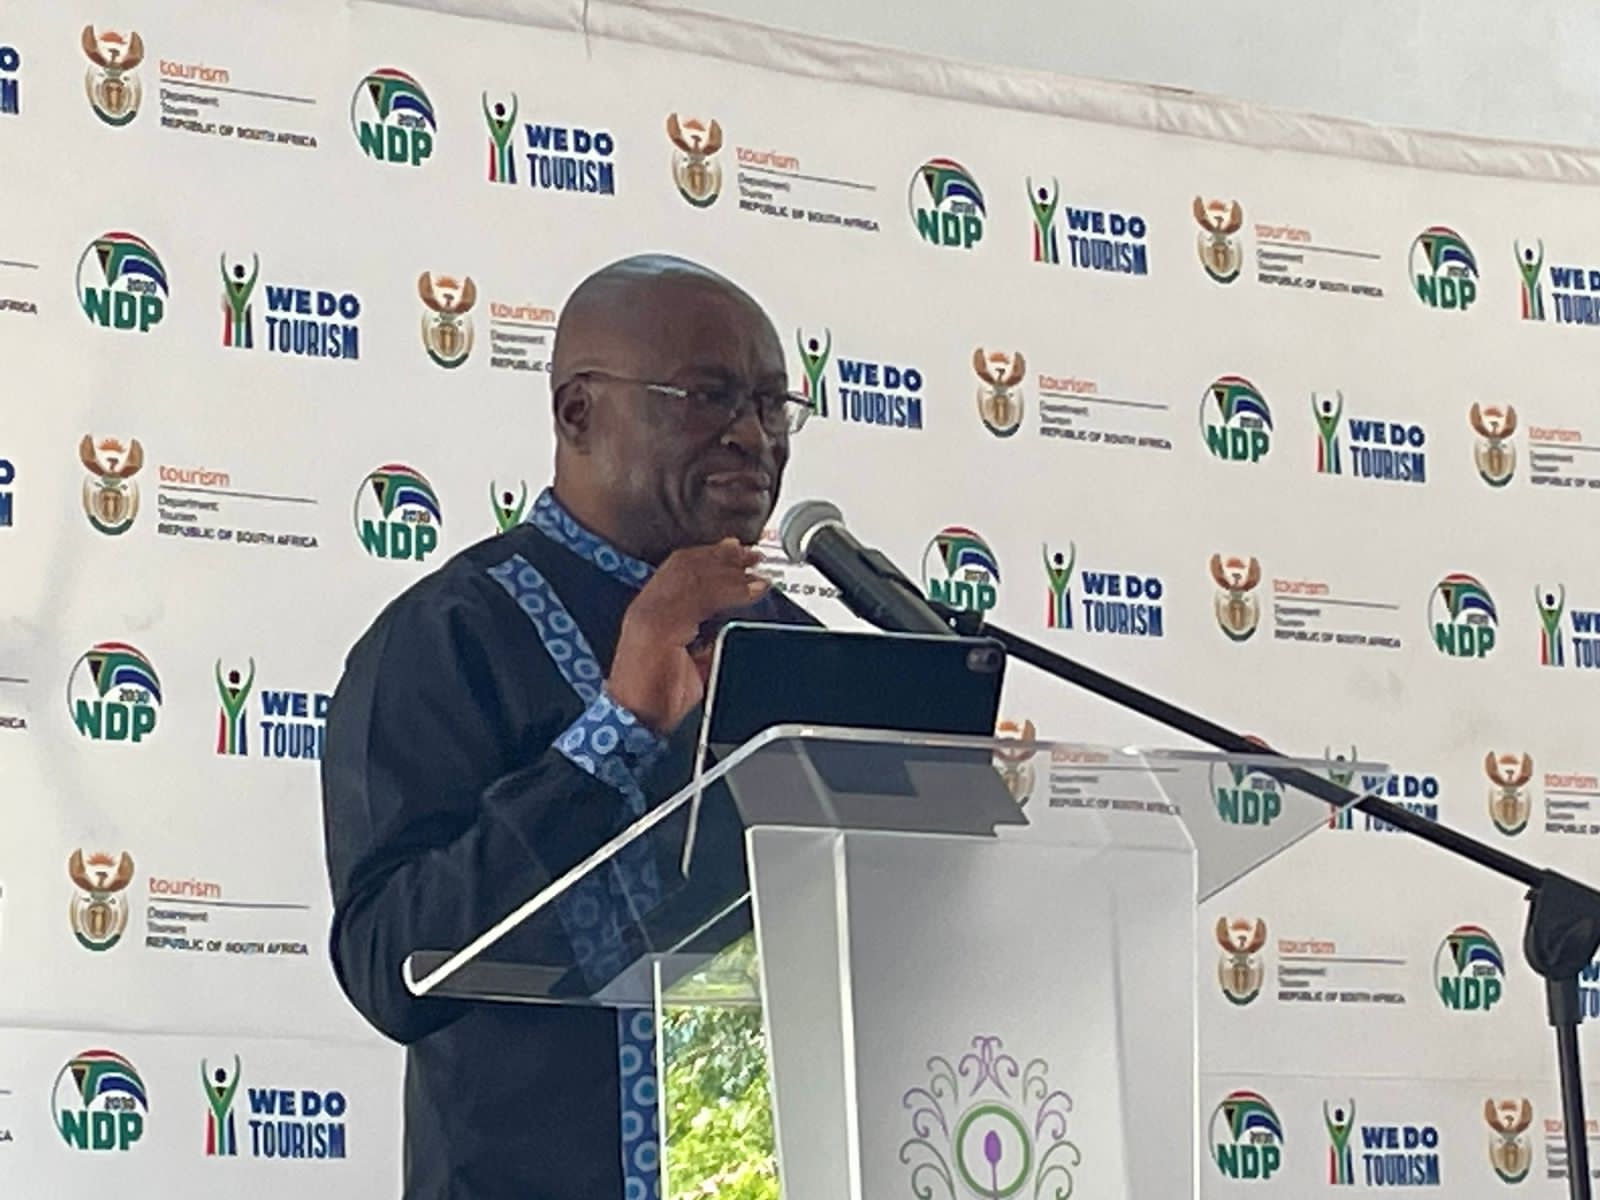 Speech by Deputy Minister Mahlalela at the Recognition of Prior Learning graduation ceremony in Limpopo